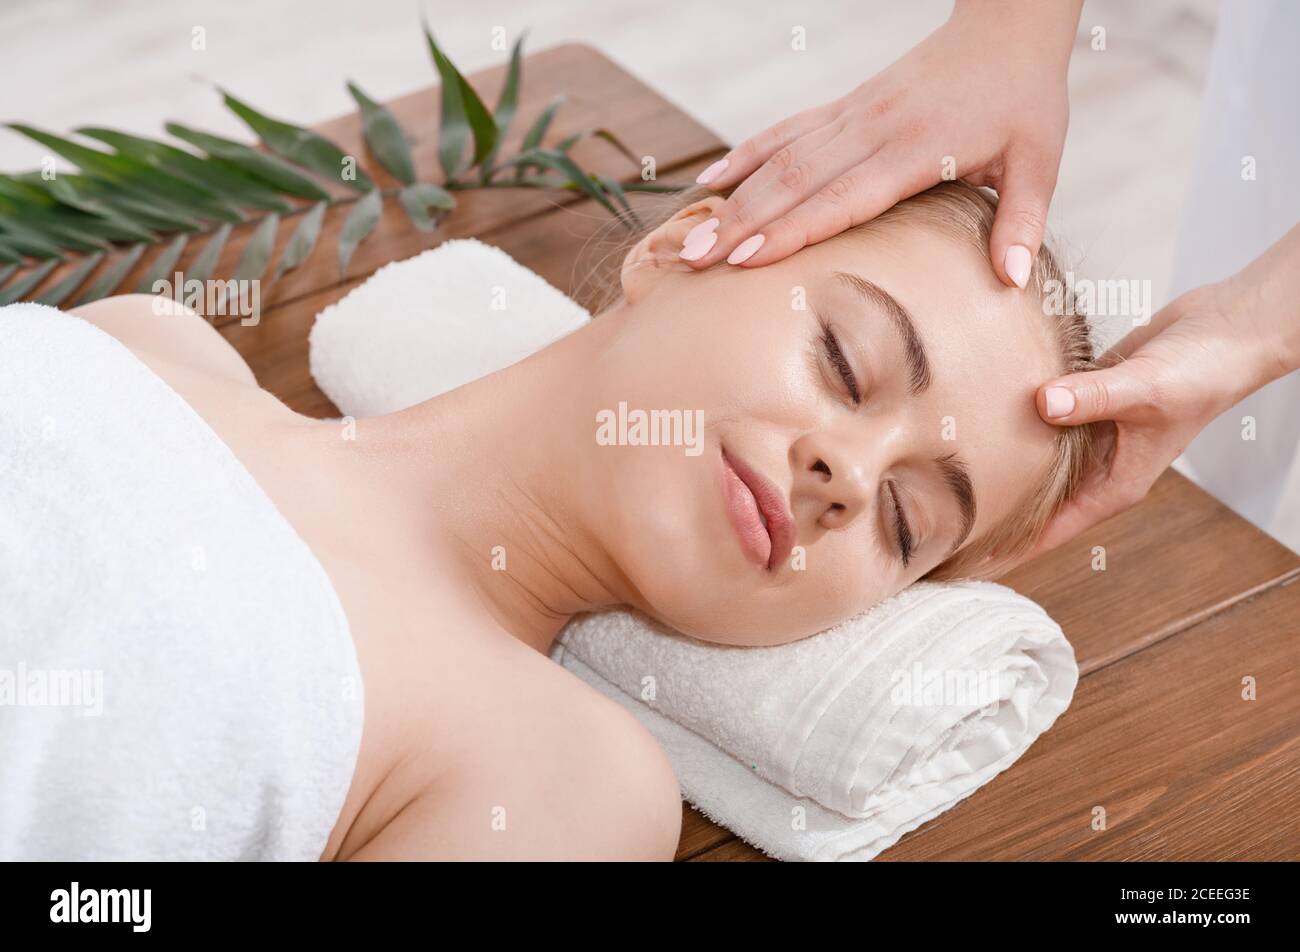 Female hands do rejuvenating face massage for woman on table with palm leaf Stock Photo